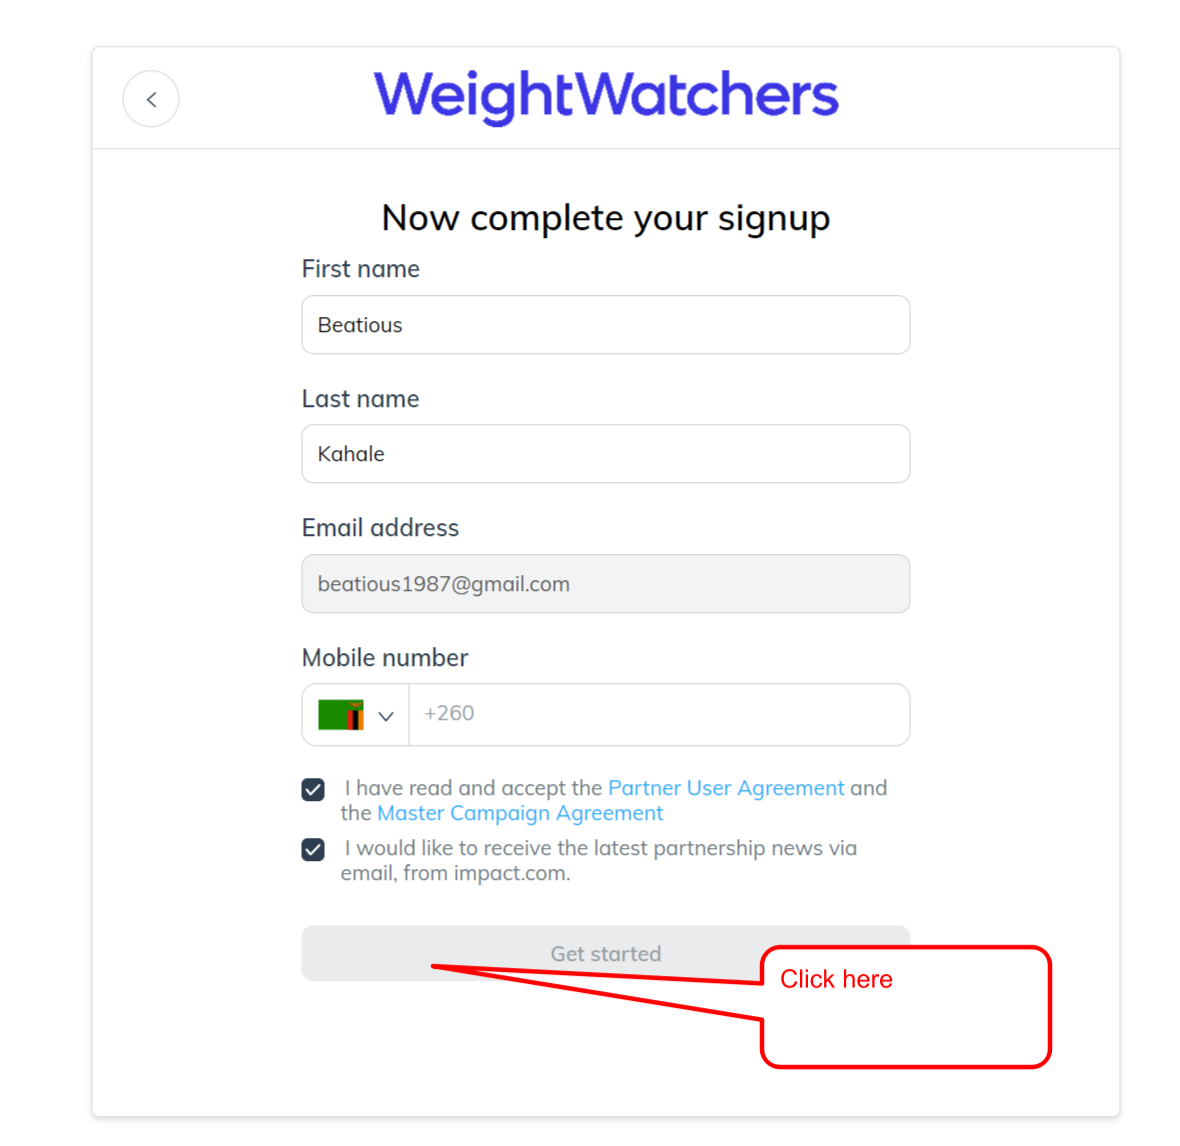 Step #7: Complete the sign-up process.